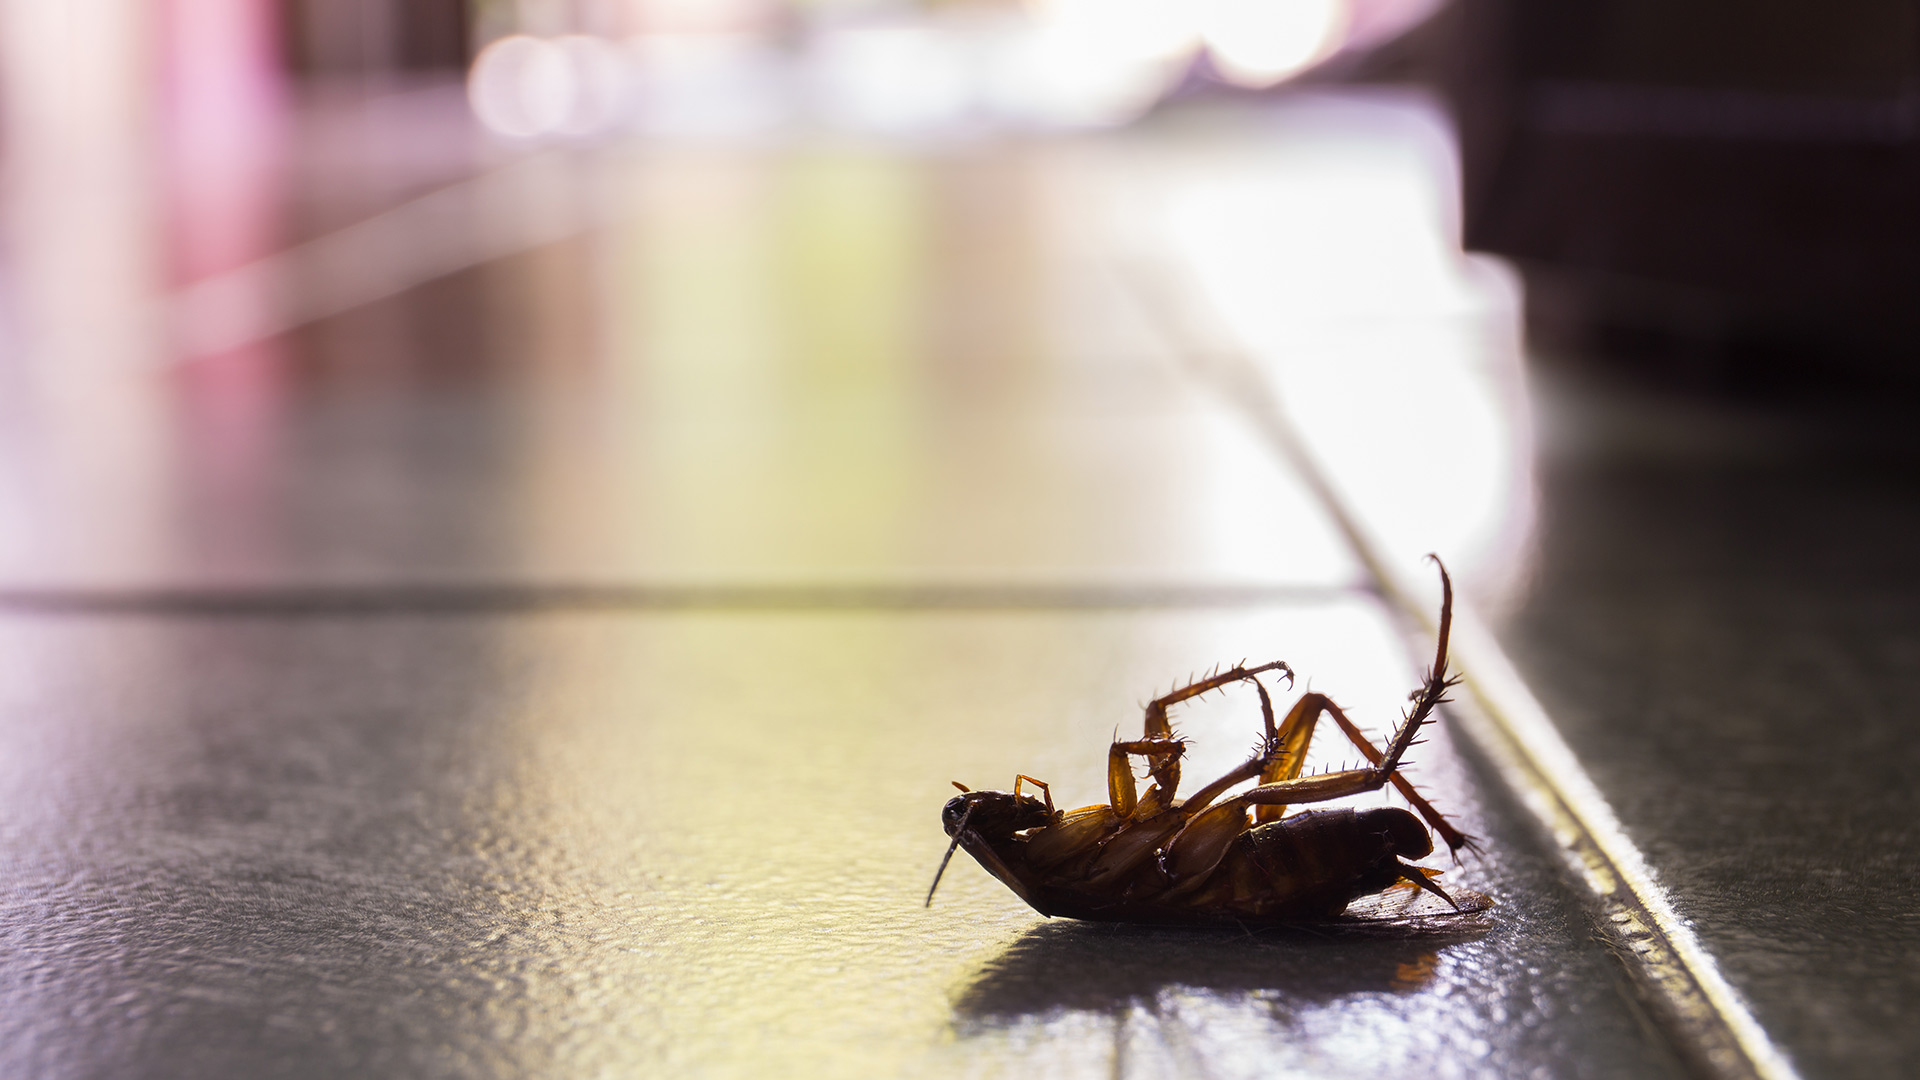 Do You Have a Cockroach Problem in Your Home? Here’s How to Keep Them Out